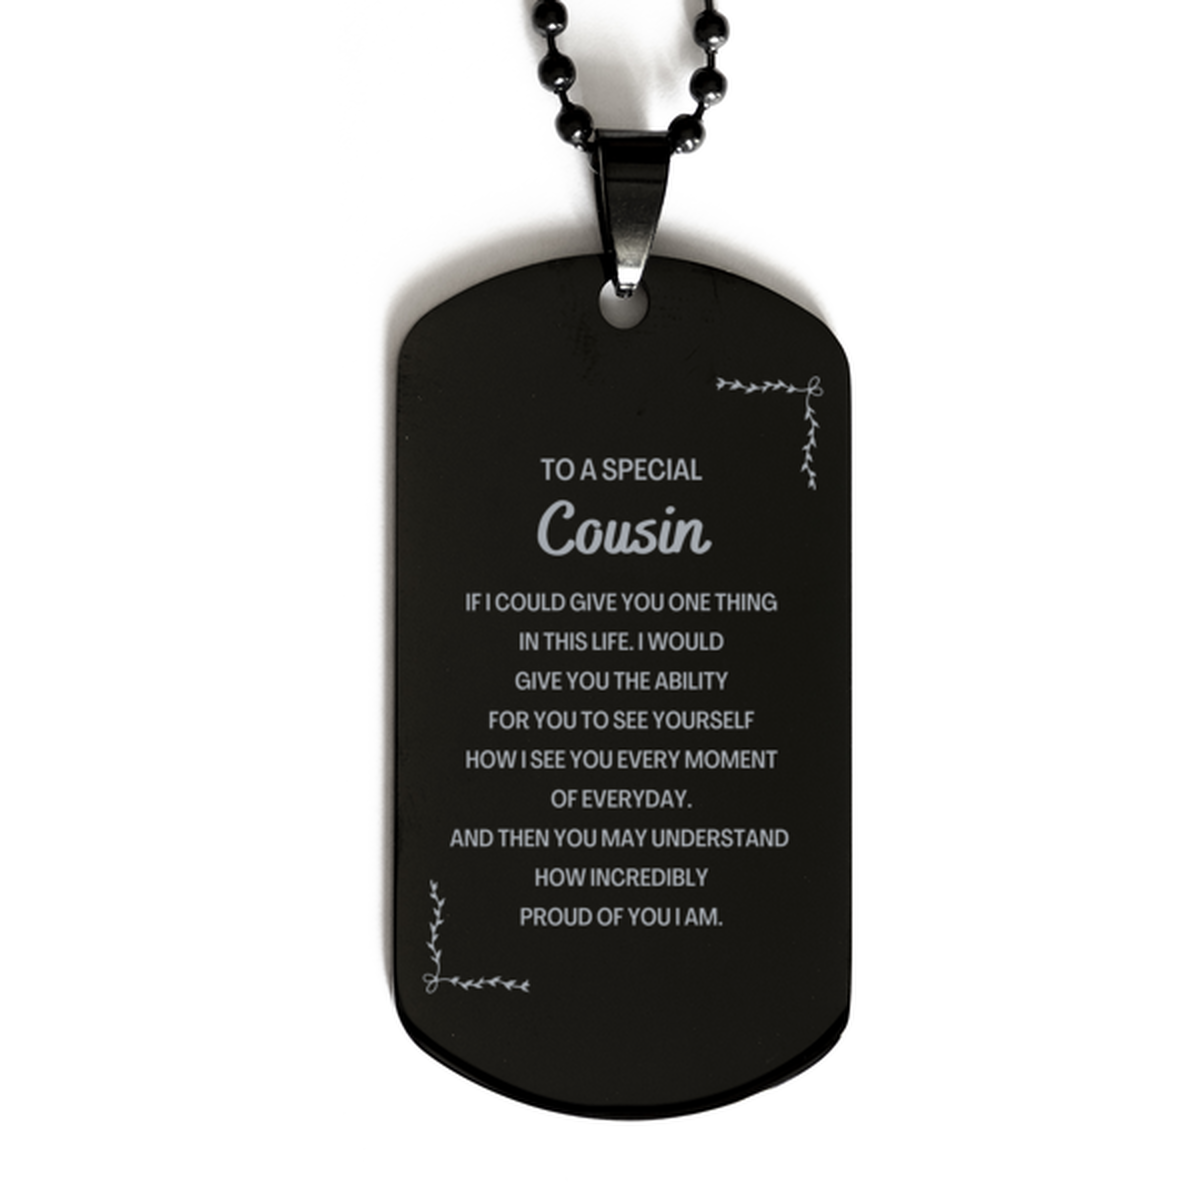 To My Cousin Black Dog Tag, Gifts For Cousin Engraved, Inspirational Gifts for Christmas Birthday, Epic Gifts for Cousin To A Special Cousin how incredibly proud of you I am